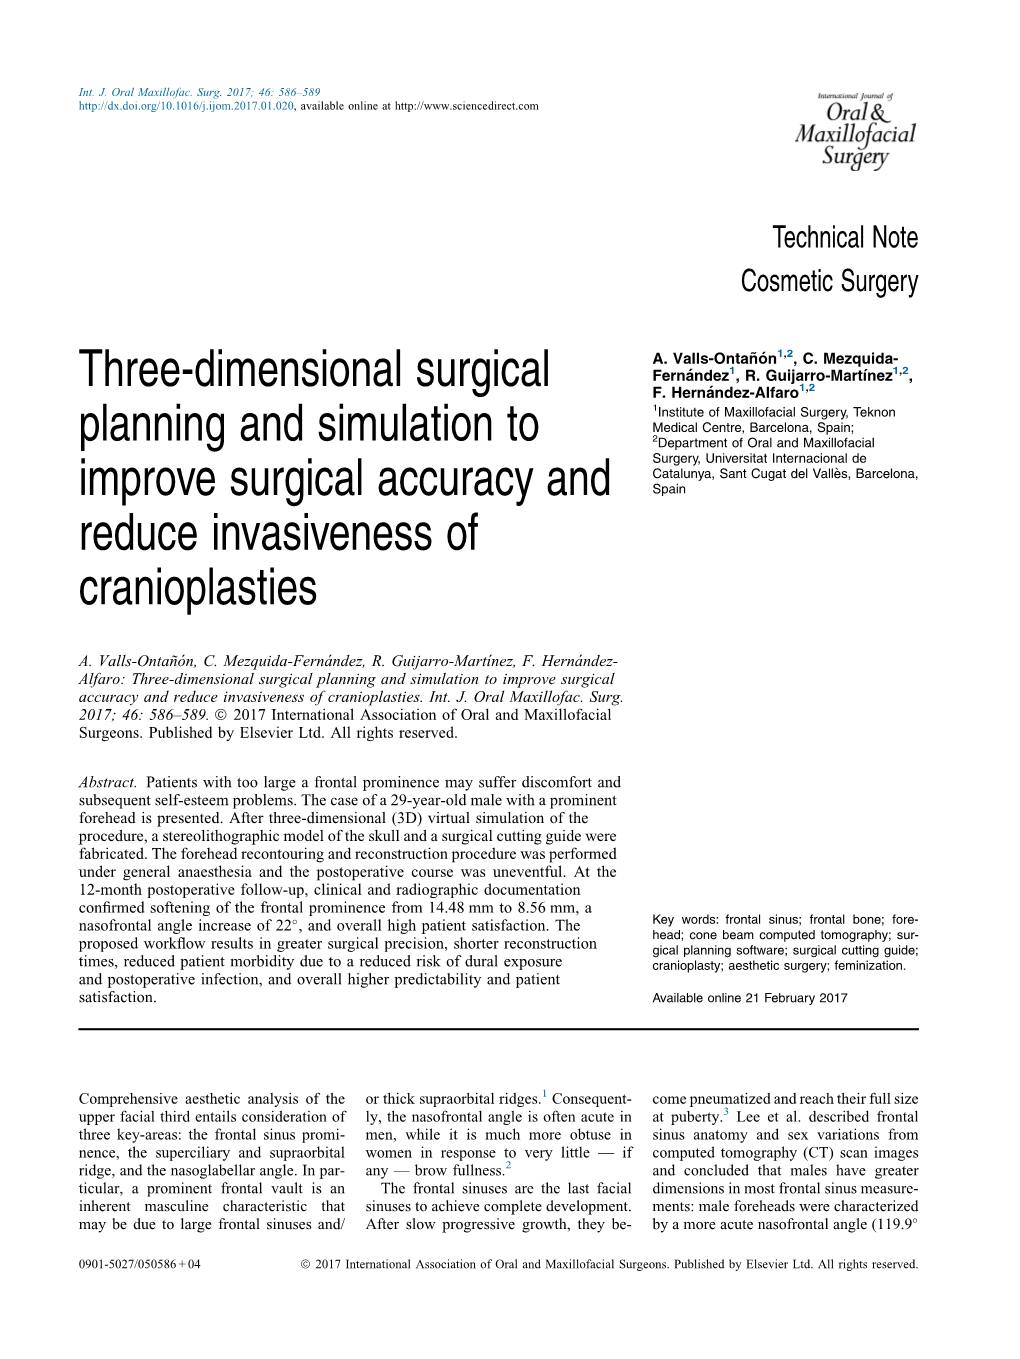 Three-Dimensional Surgical Planning and Simulation to Improve Surgical